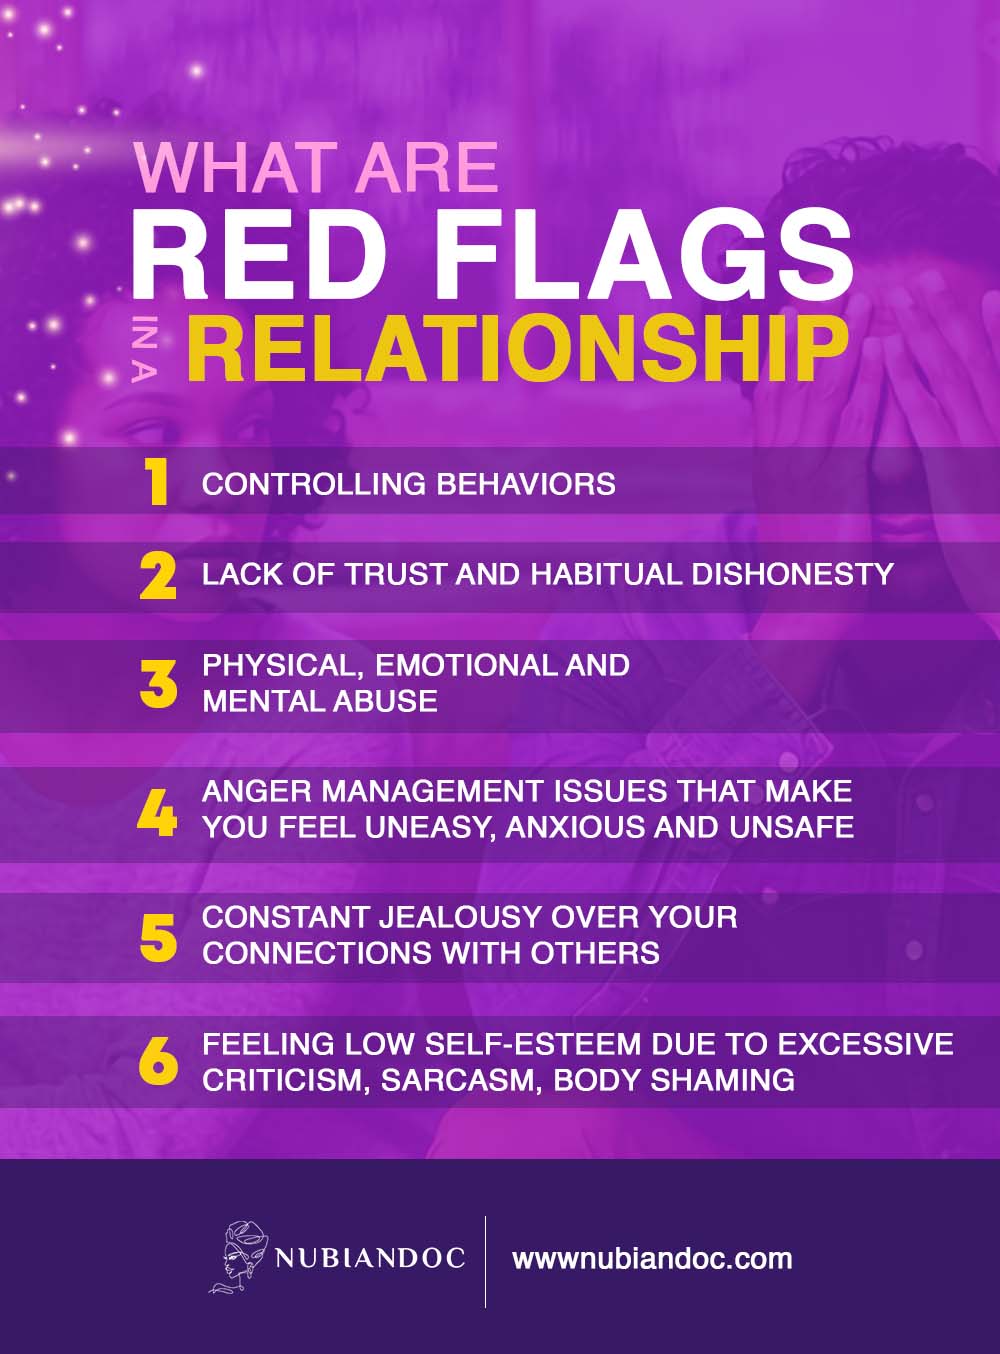 healthy relationships: red flags relationship